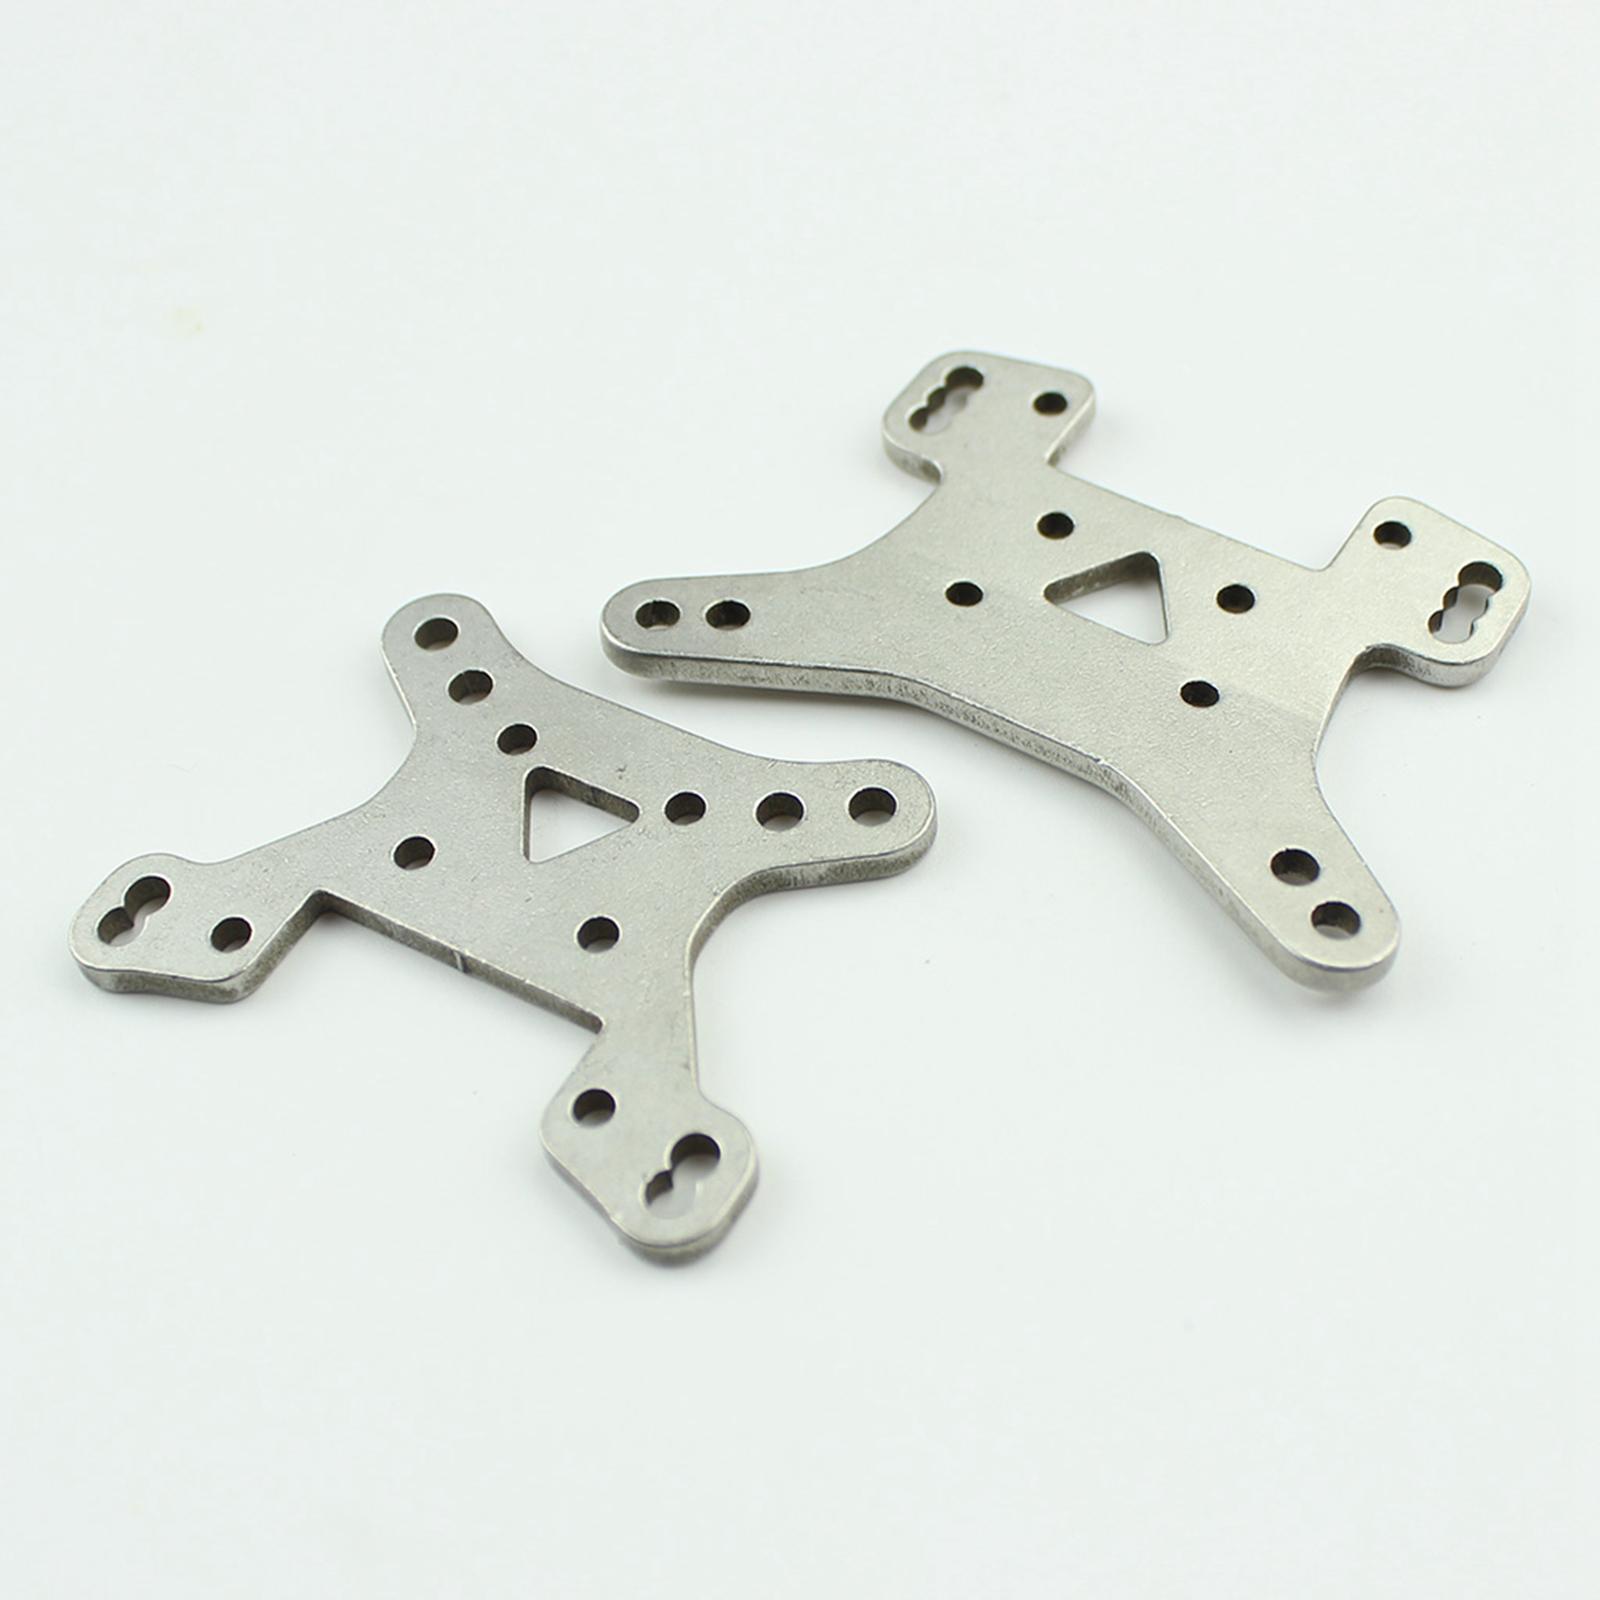 Metal Front Shock & Rear Shock Absorber Plate for WLtoys 144002 1/14 RC Car